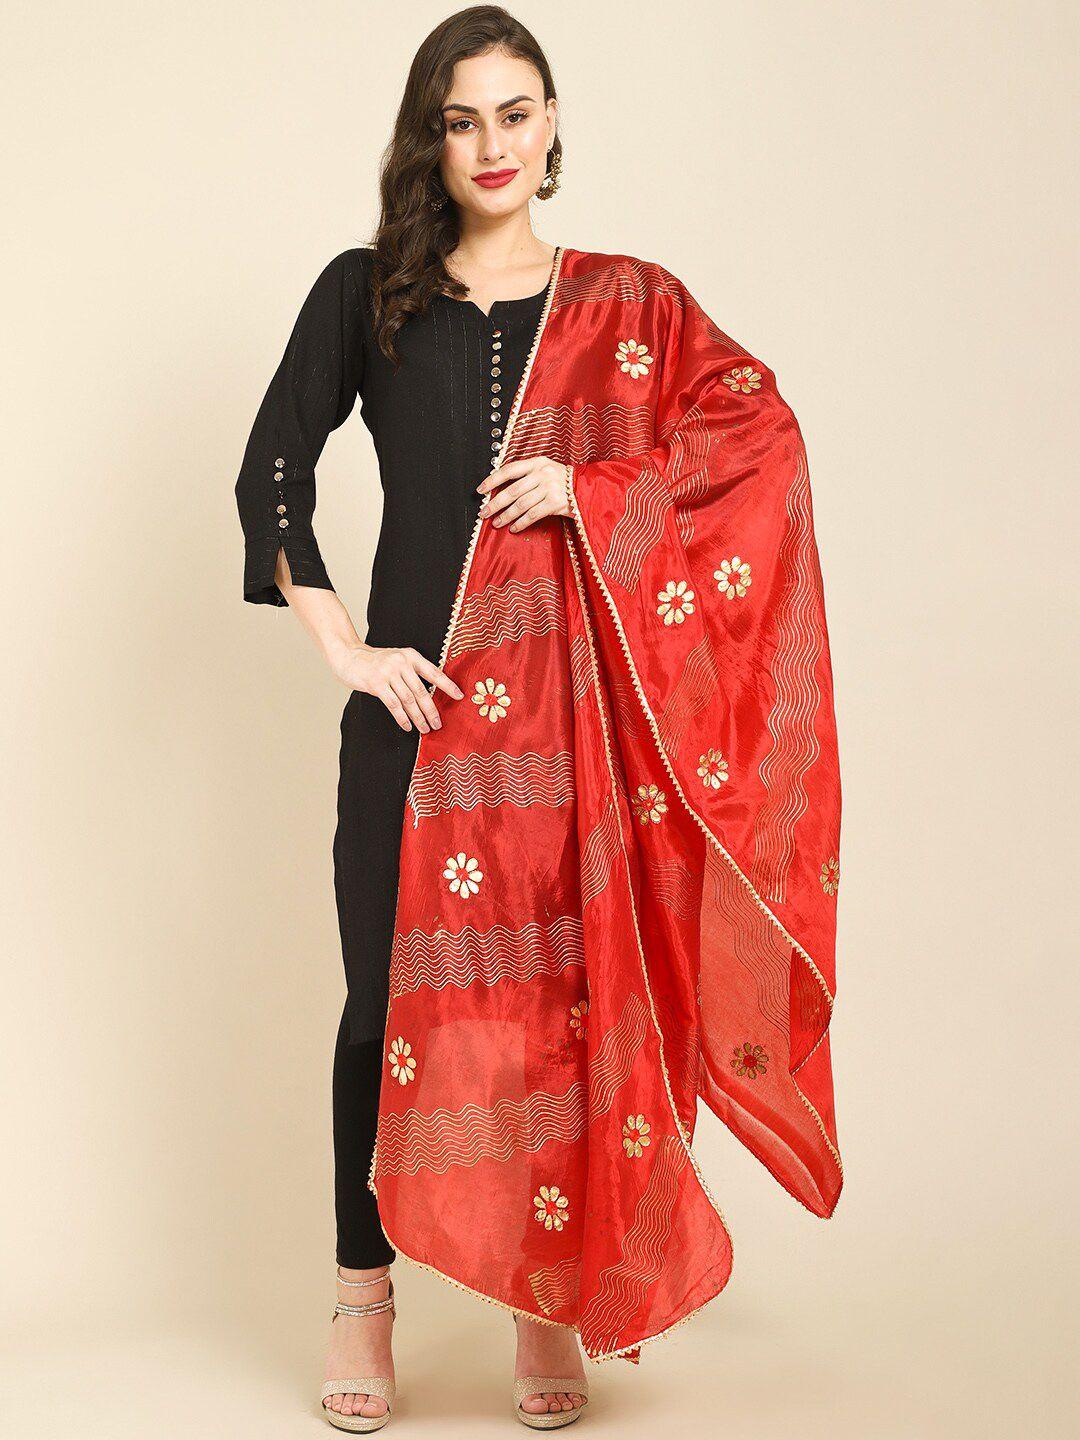 miaz lifestyle red & gold-toned embroidered block print dupatta